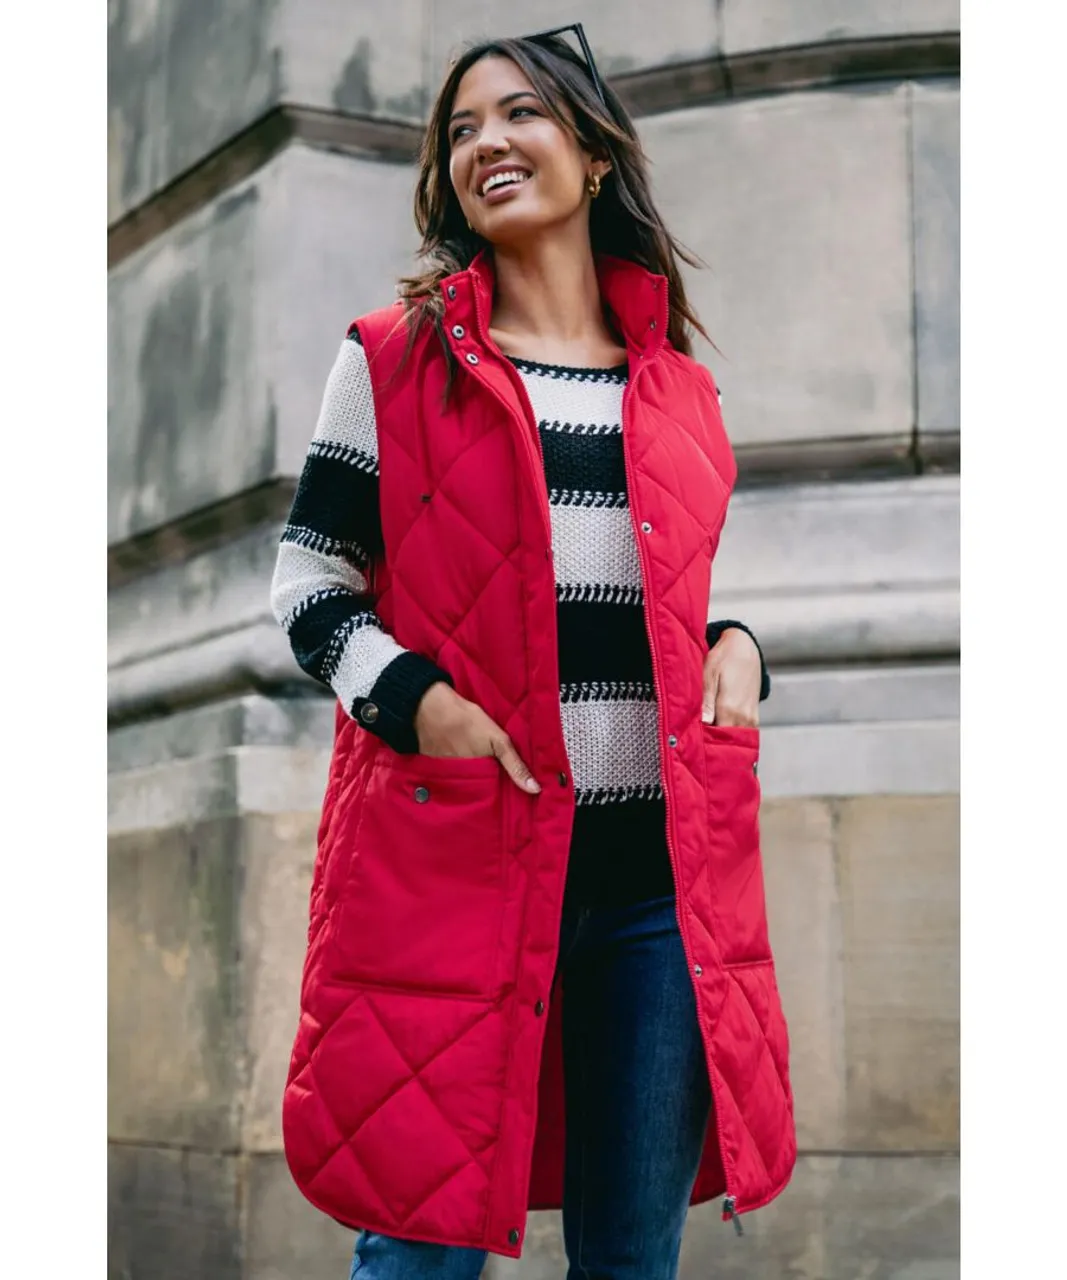 Roman Womens Diamond Quilted Longline Gilet - Red